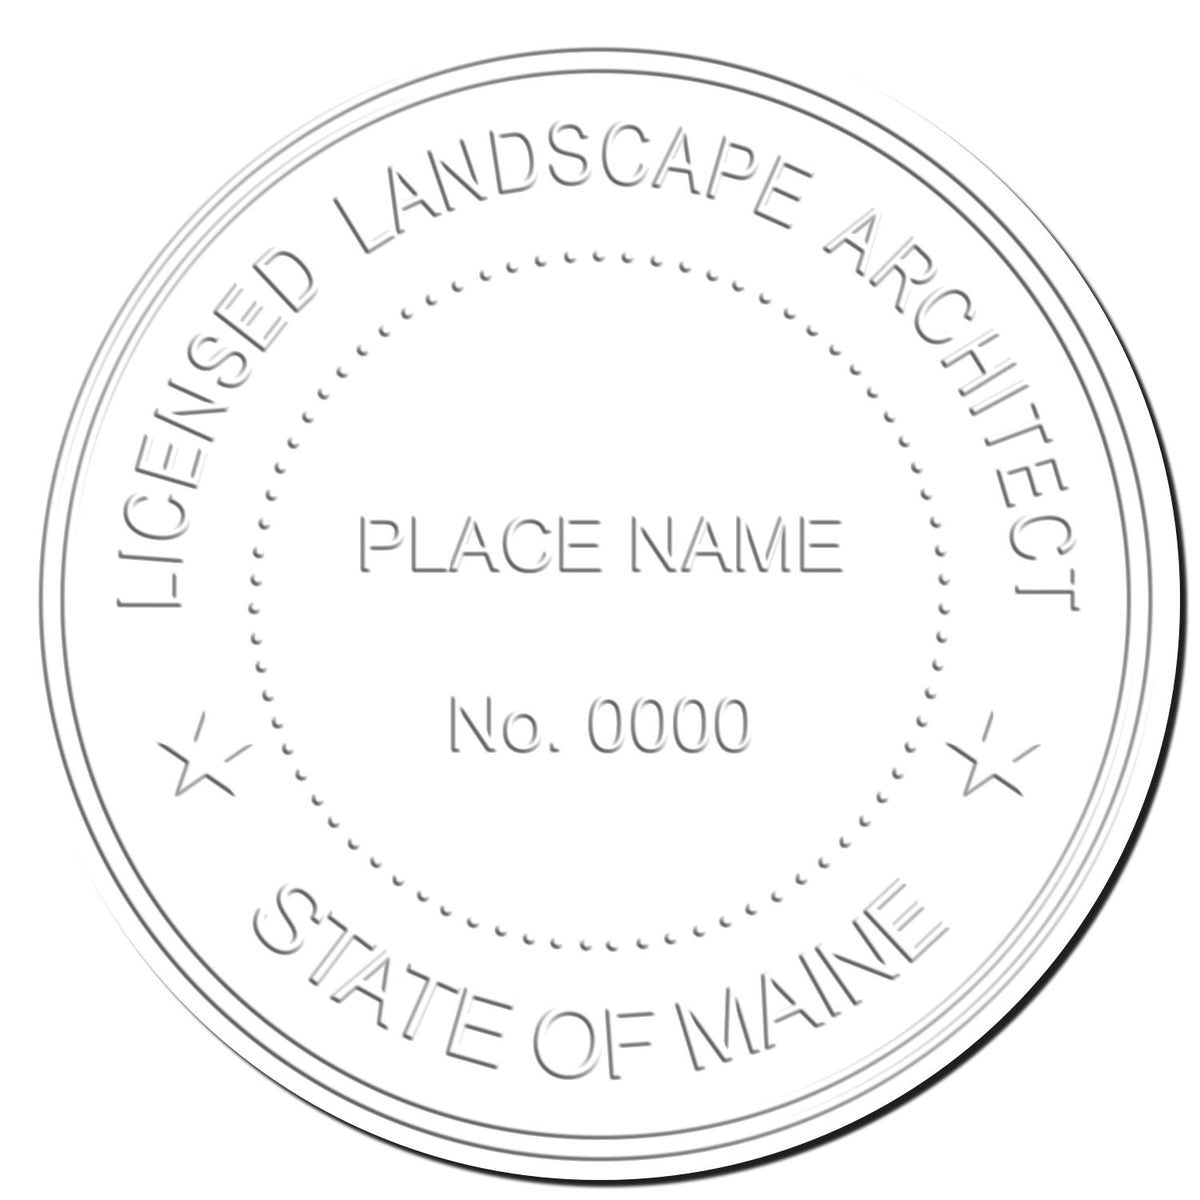 This paper is stamped with a sample imprint of the Gift Maine Landscape Architect Seal, signifying its quality and reliability.